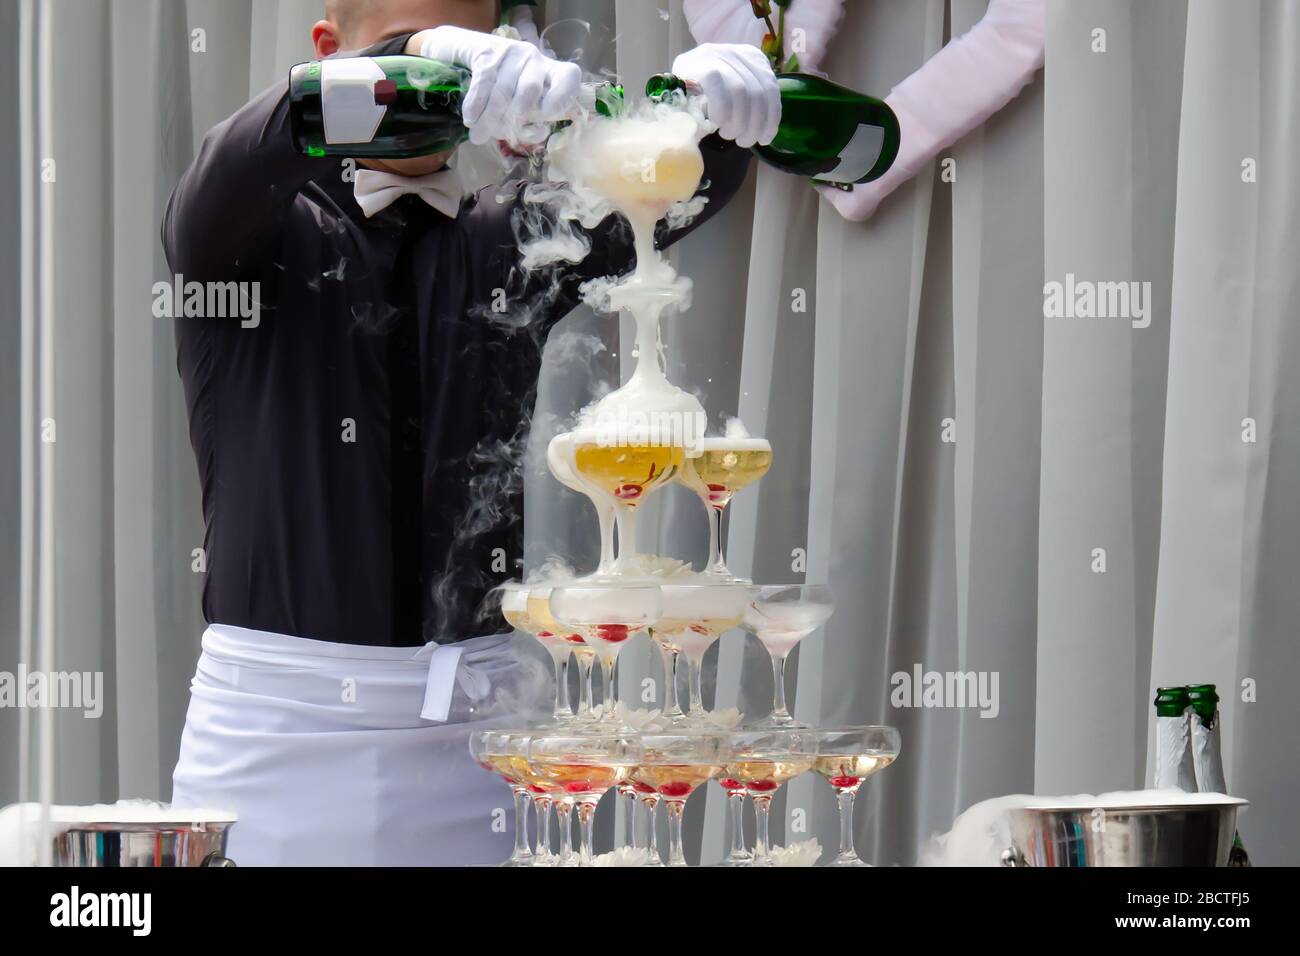 Catering service. Wedding slide champagne for bride and groom outdoors. Catering bar for celebration Stock Photo